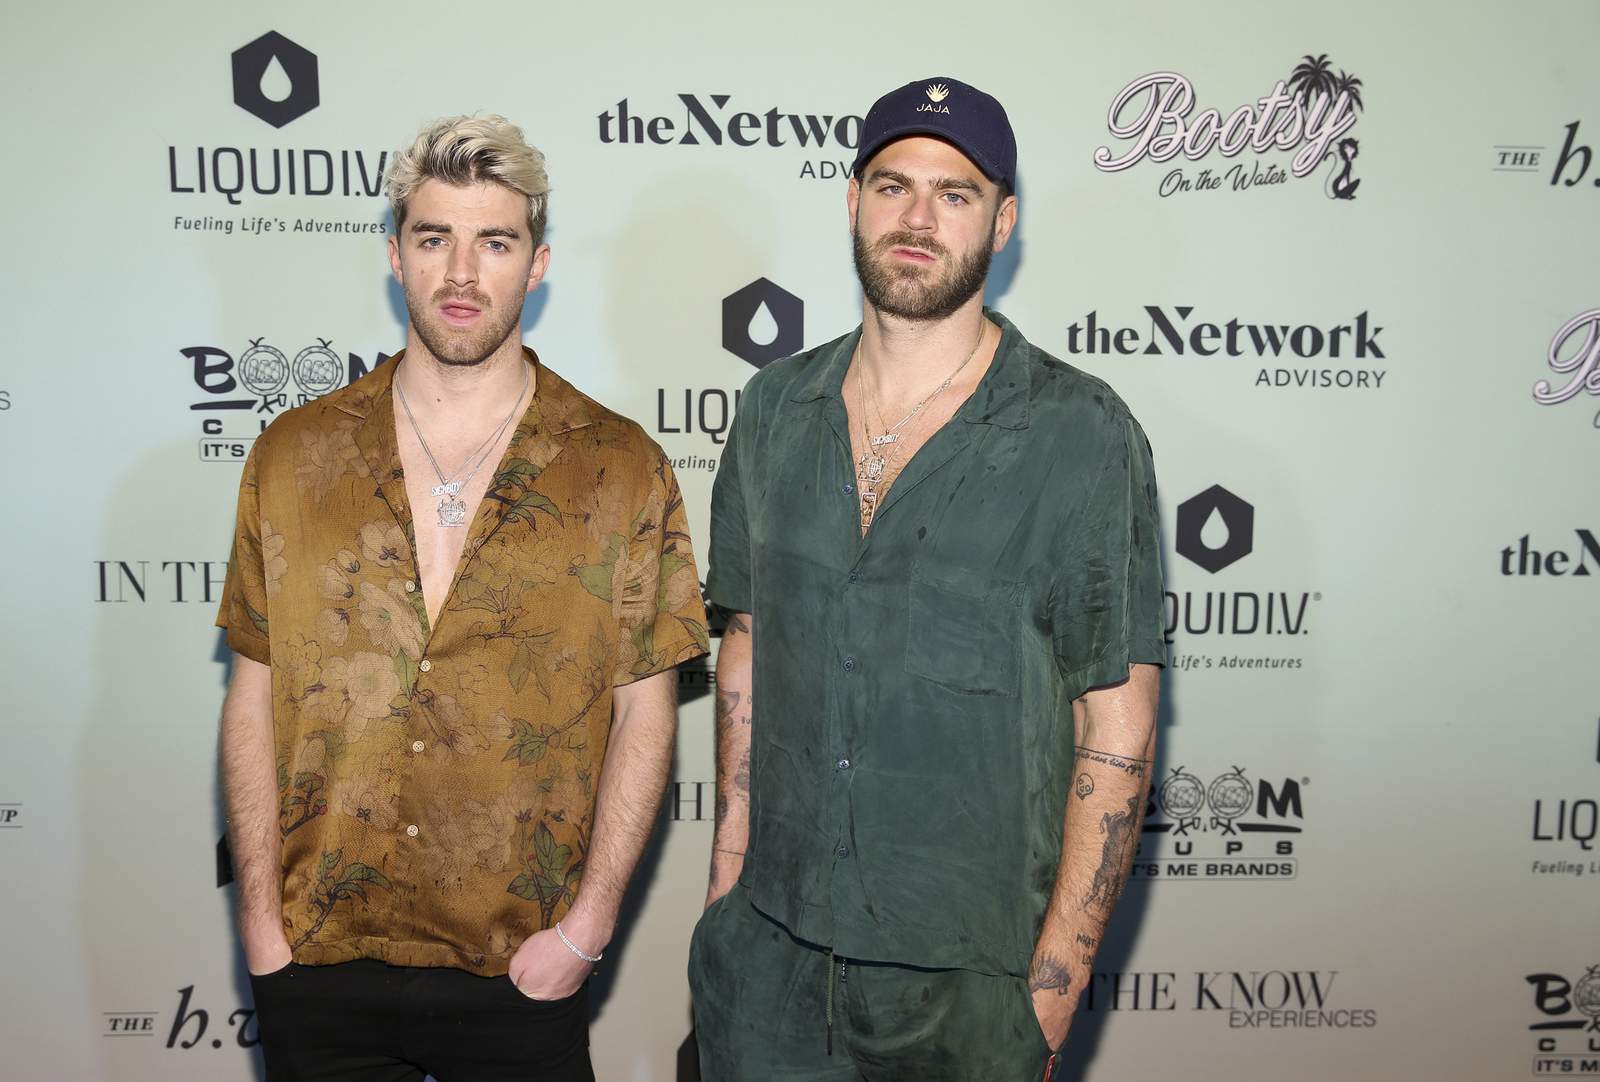 Appalled Cuomo to investigate crowded Chainsmokers concert